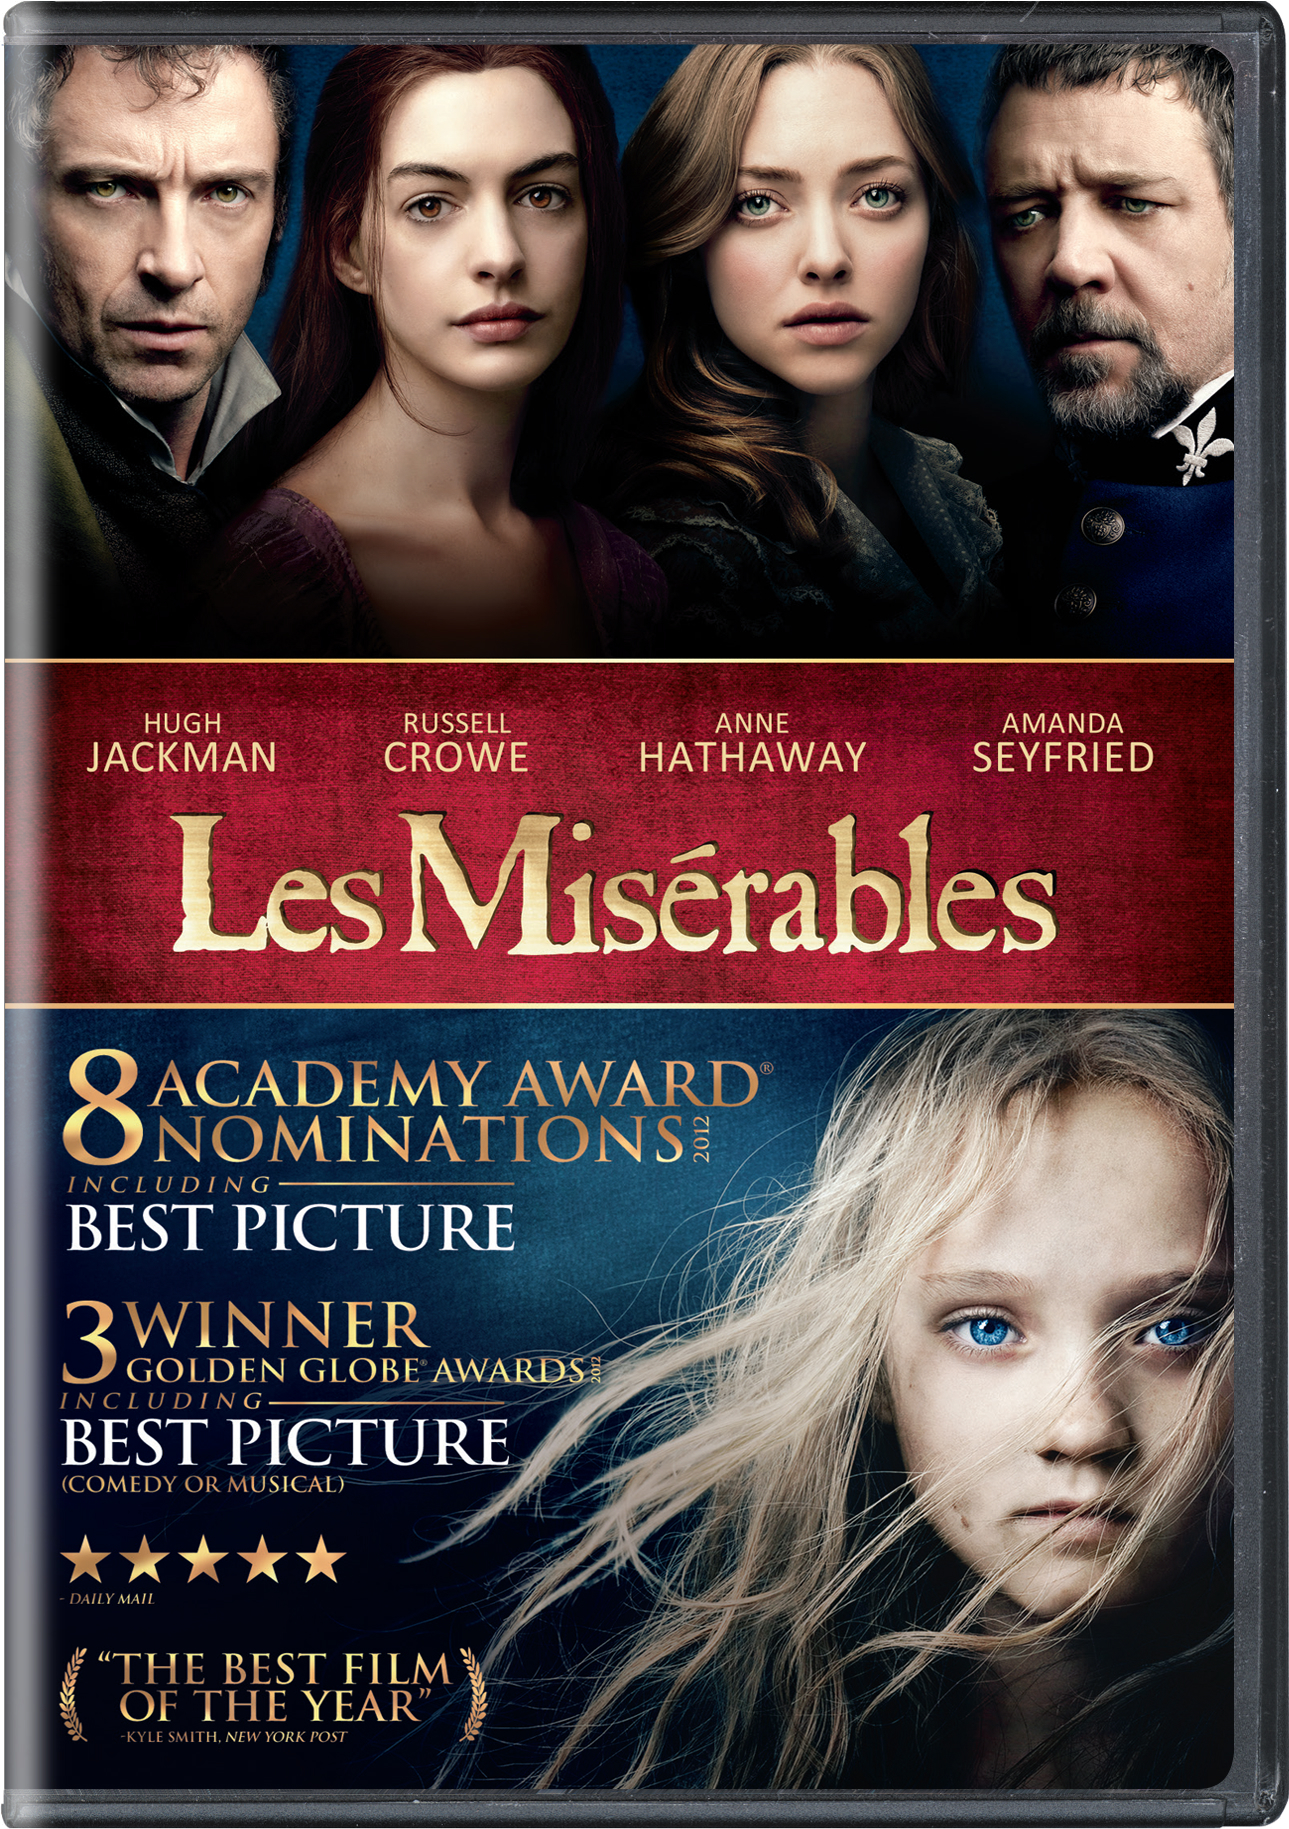 Les Misérables - DVD [ 2012 ]  - Musical Movies On DVD - Movies On GRUV